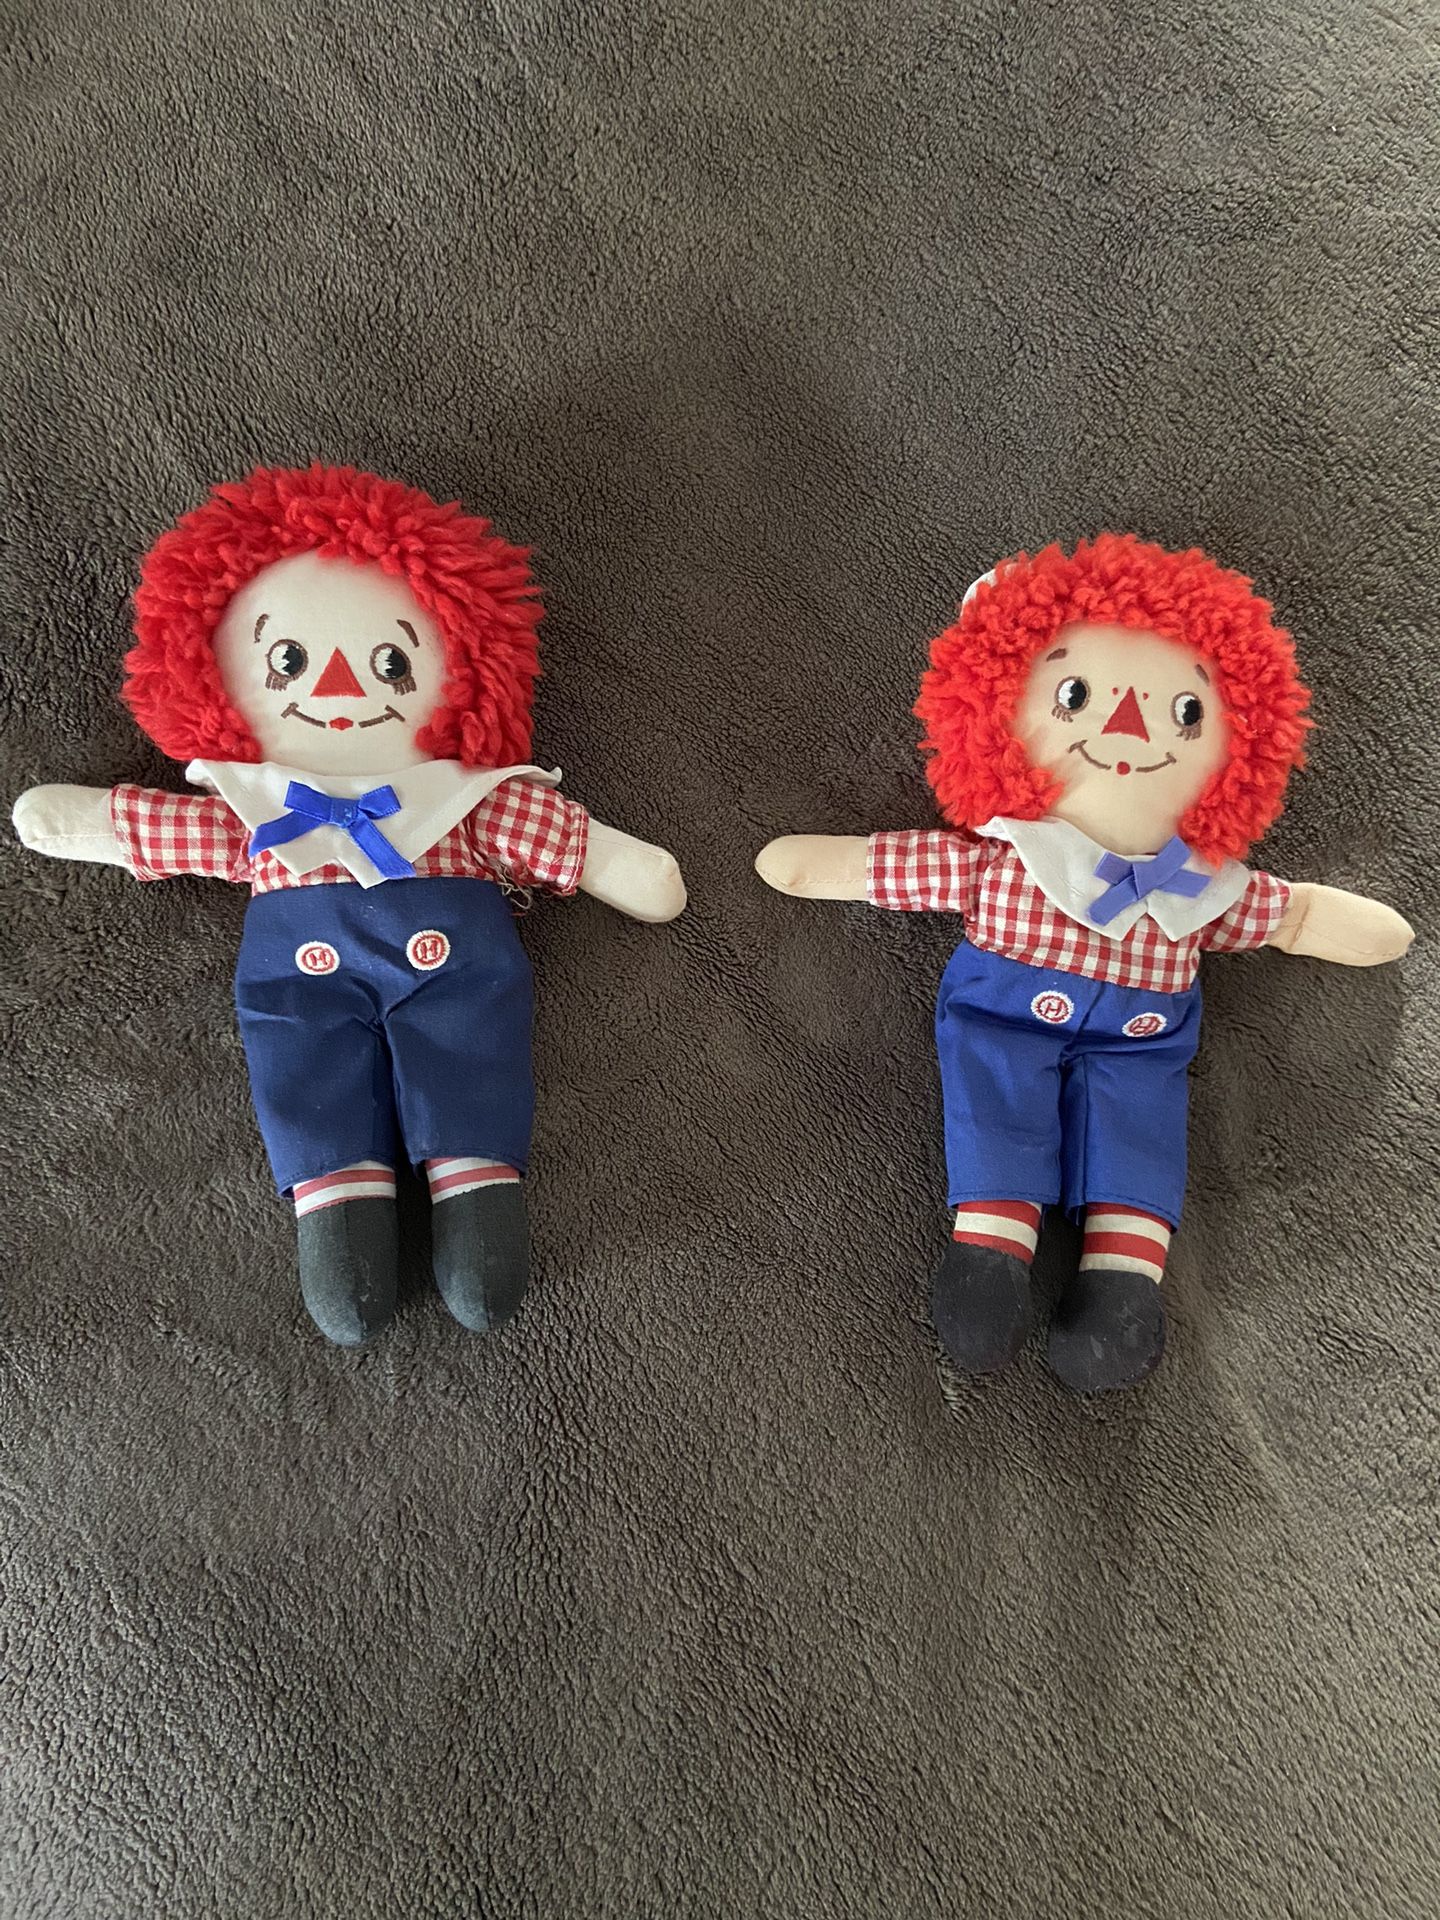 Two 6” Raggedy Andy Dolls By Applause